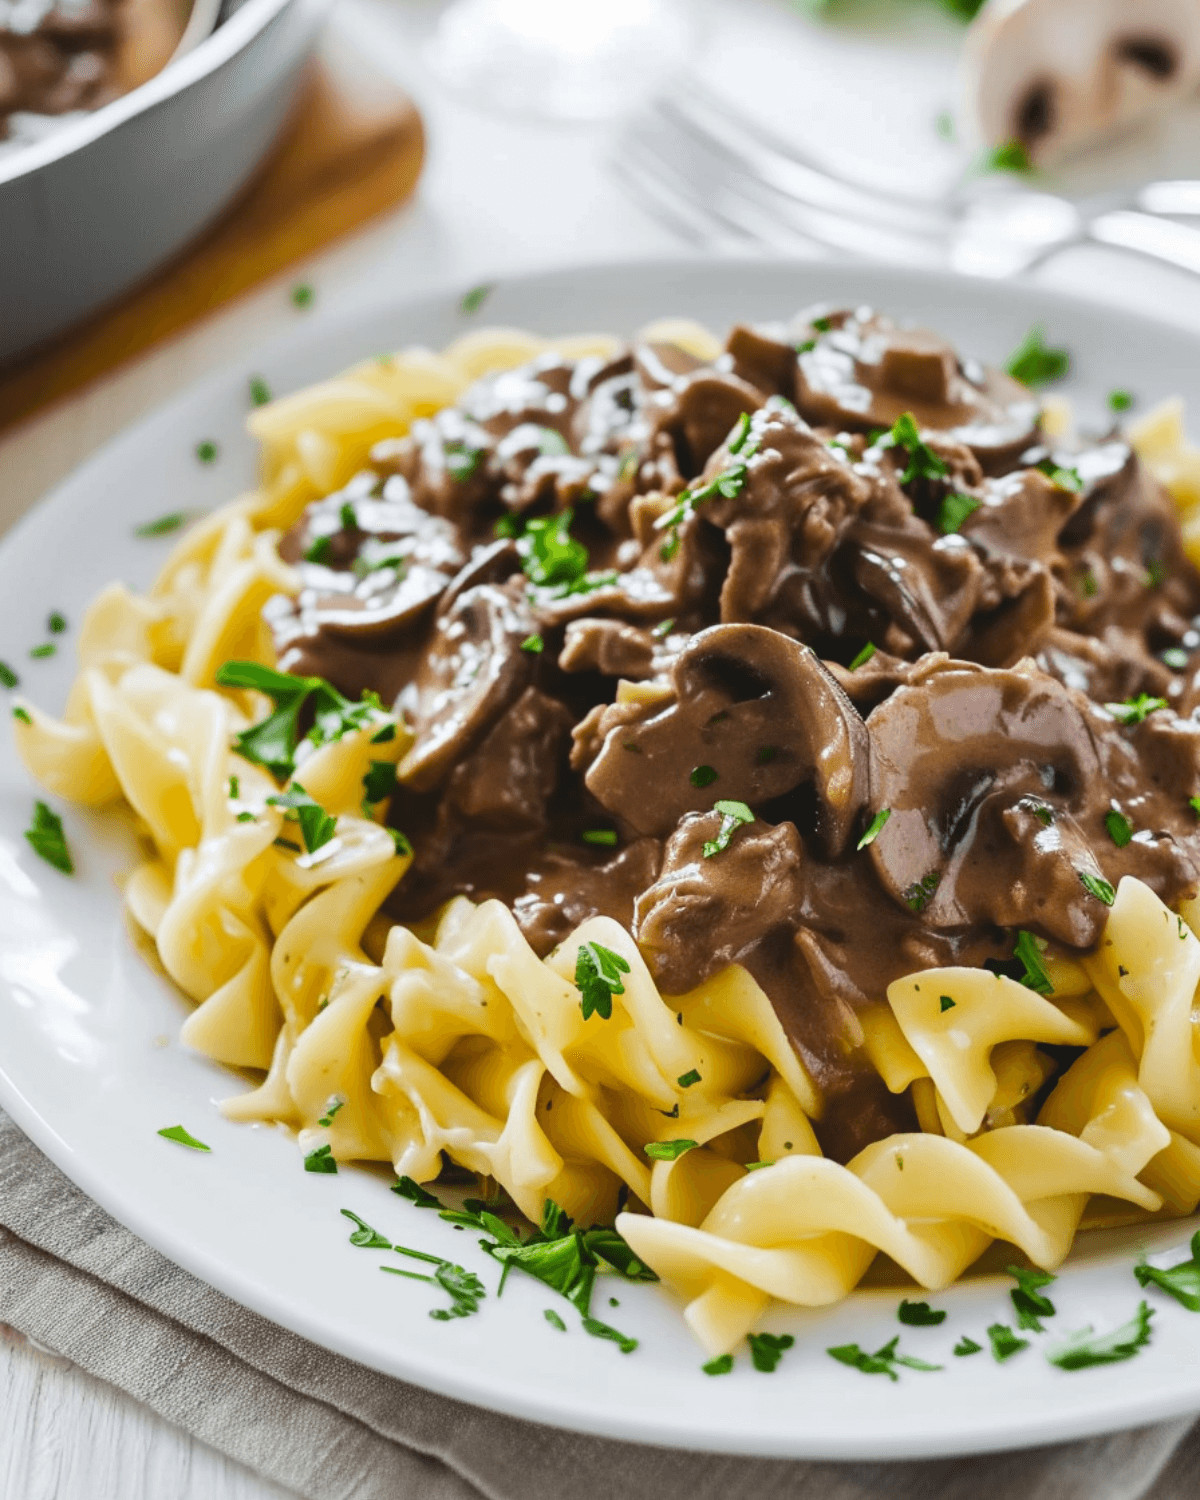 A plate of venison stroganoff with pasta on a wooden table.